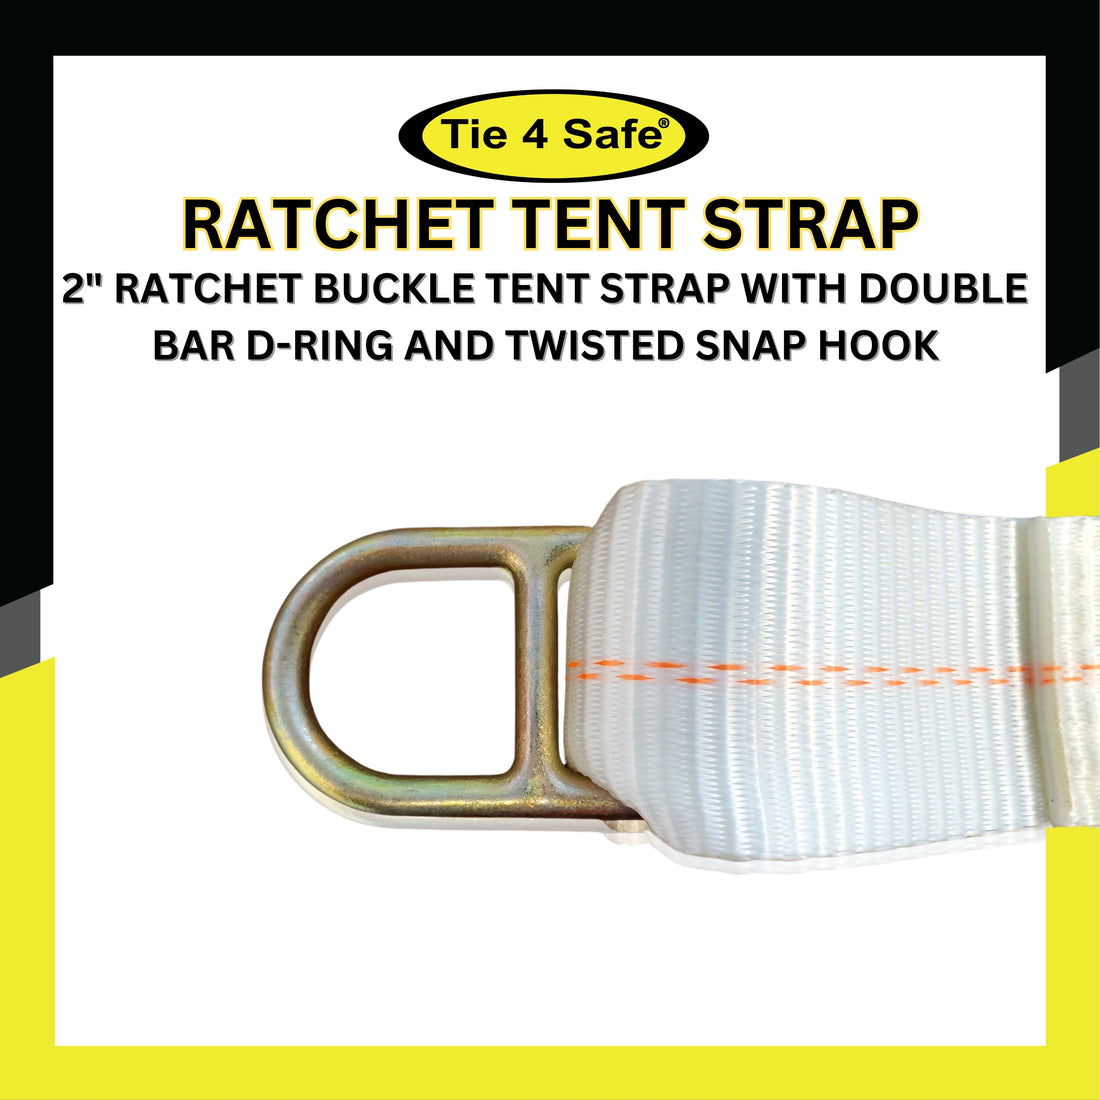 2" Ratchet Buckle Tent Strap With Double Bar D-Ring And Twisted Snap Hook